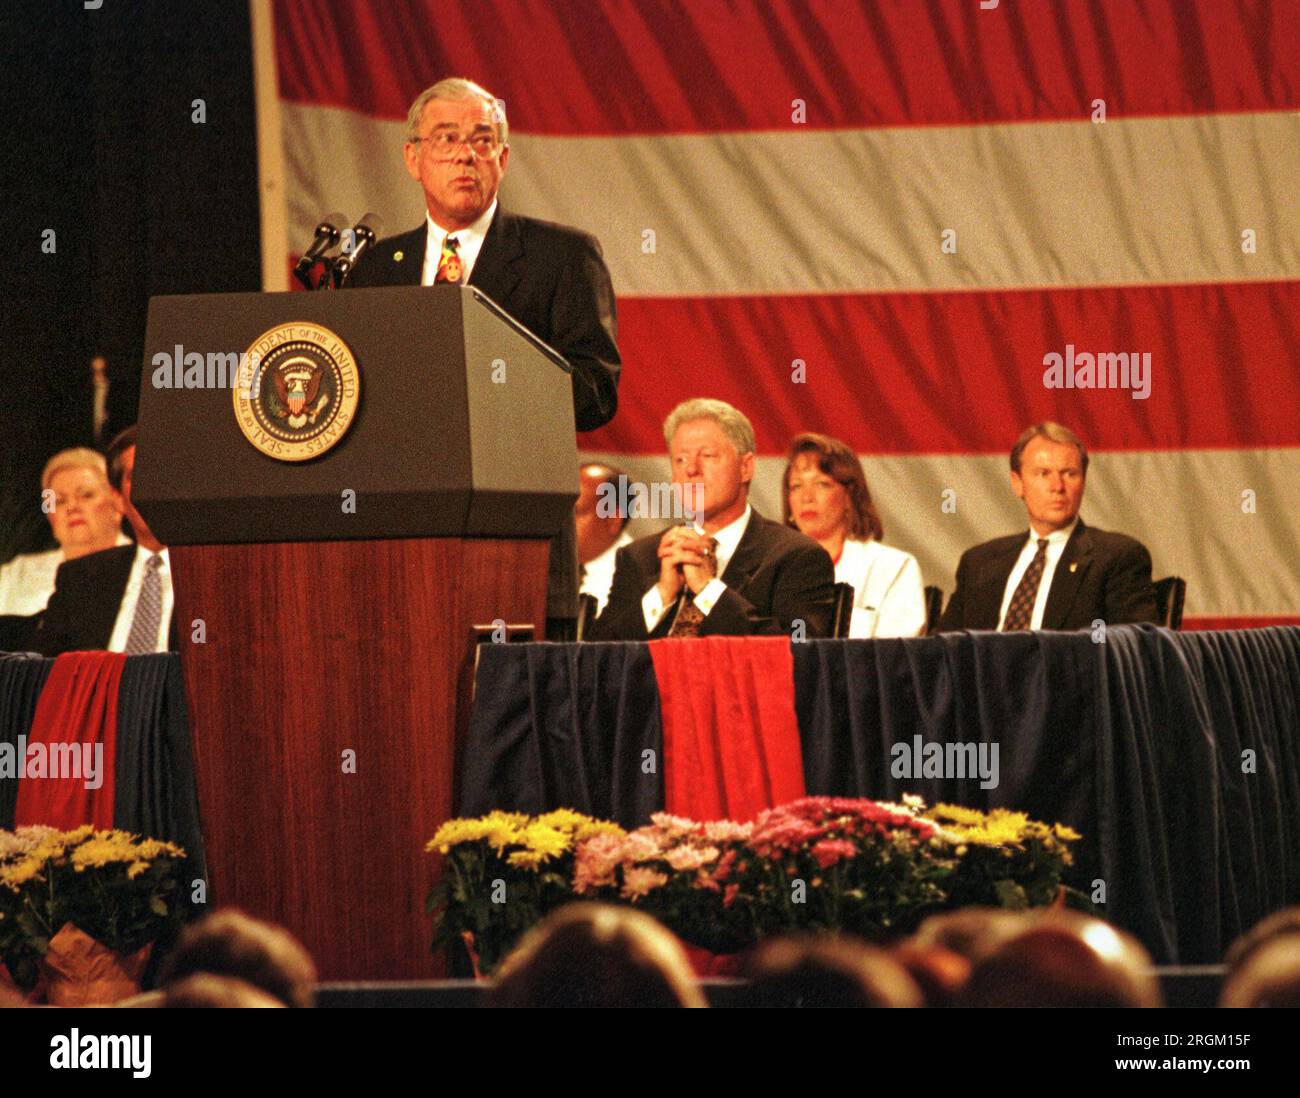 Gov. Paul Patton talks about healthcare in the state of Kentucky during a visit by President Bill Clinton on Monday, Aug. 10, 1998 at the Commonwealth Convention Center in Louisville, Jefferson County, KY, USA. The president visited Kentucky to promote his proposed 'patients' bill of rights' legislation and campaign for Democratic congressional candidate Scotty Baesler. (Apex MediaWire Photo by Billy Suratt) Stock Photo